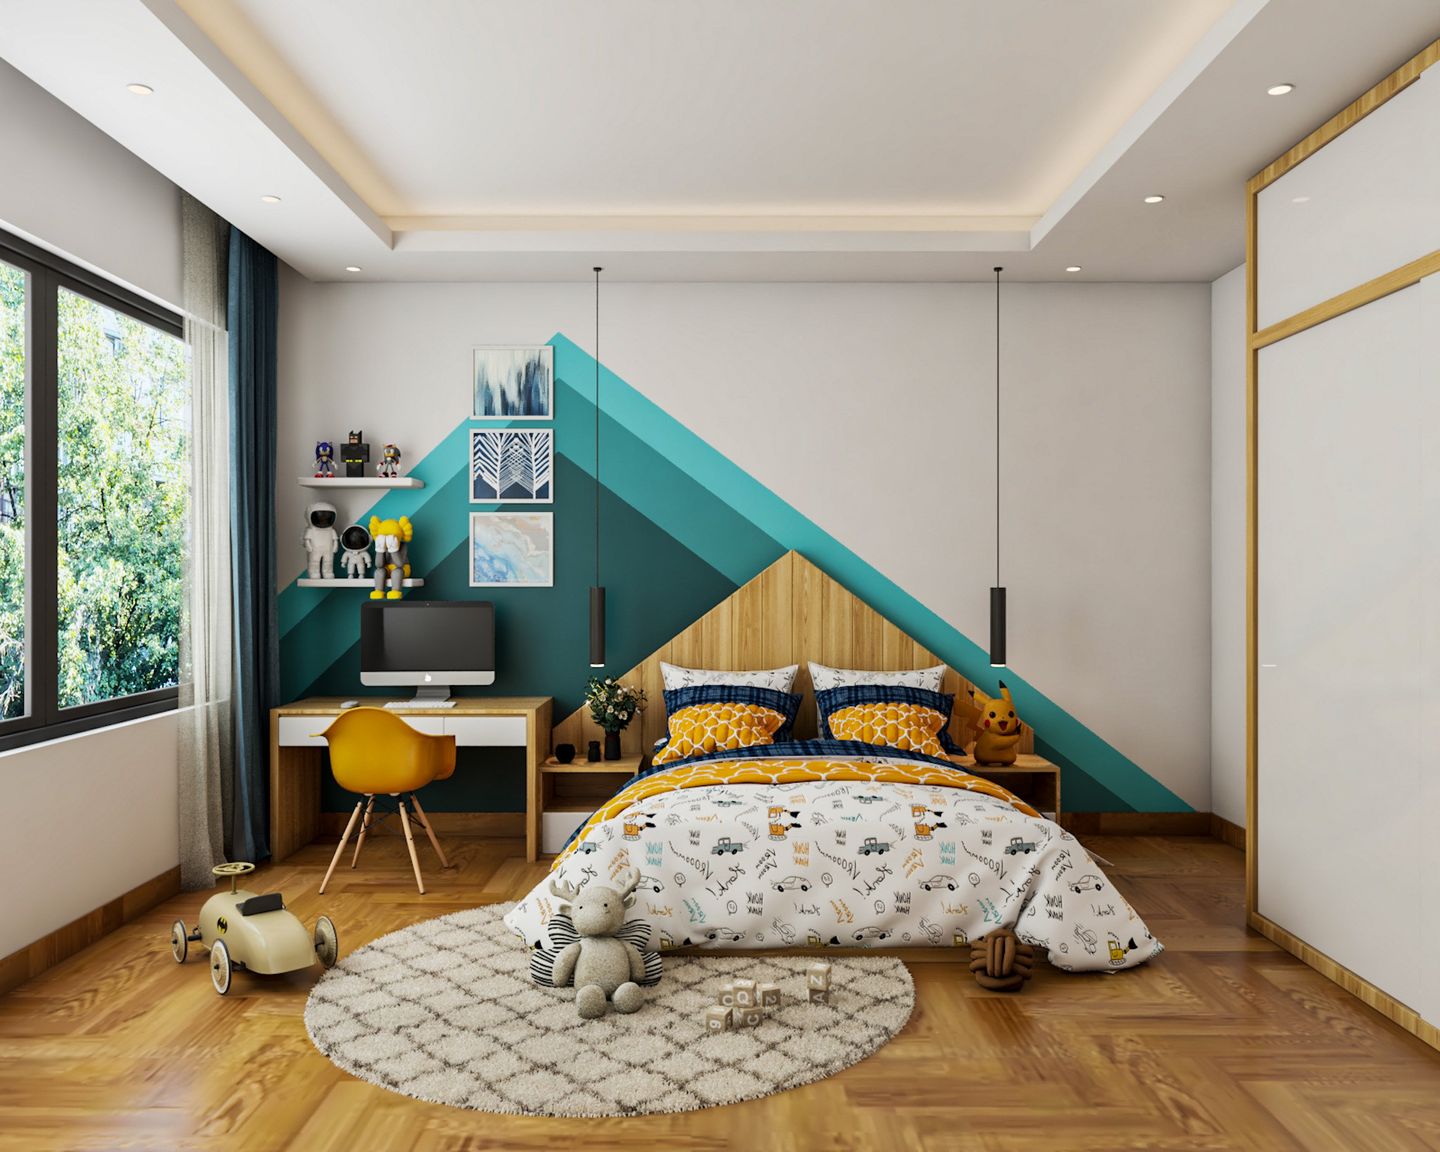 Kid's Bedroom With King Size Bed, Two Bedside Tables, And Wall Shelves - Livspace